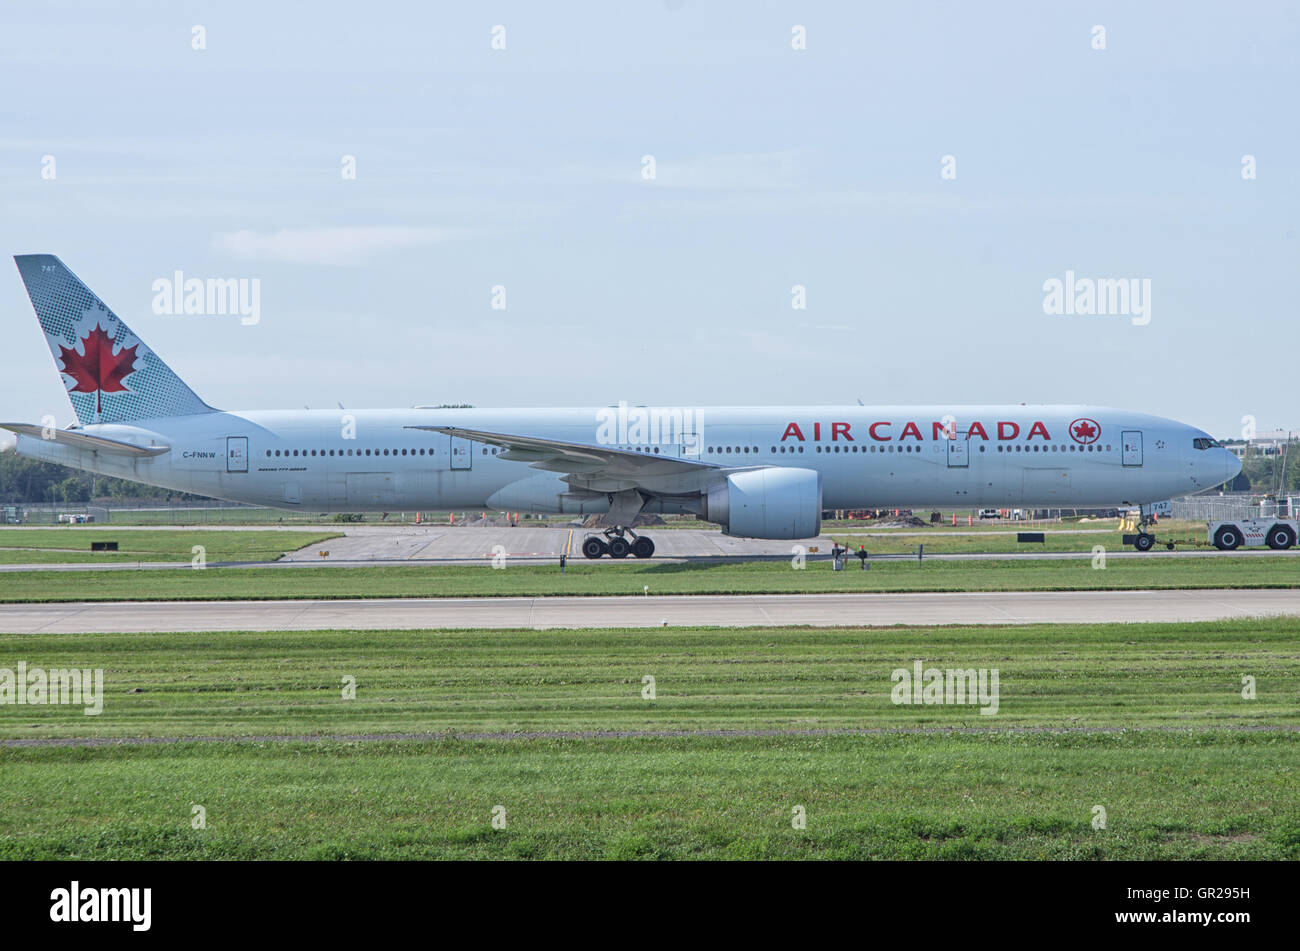 Air Canada plane on the runway of Montreal Pierre Elliott Trudeau airport Stock Photo